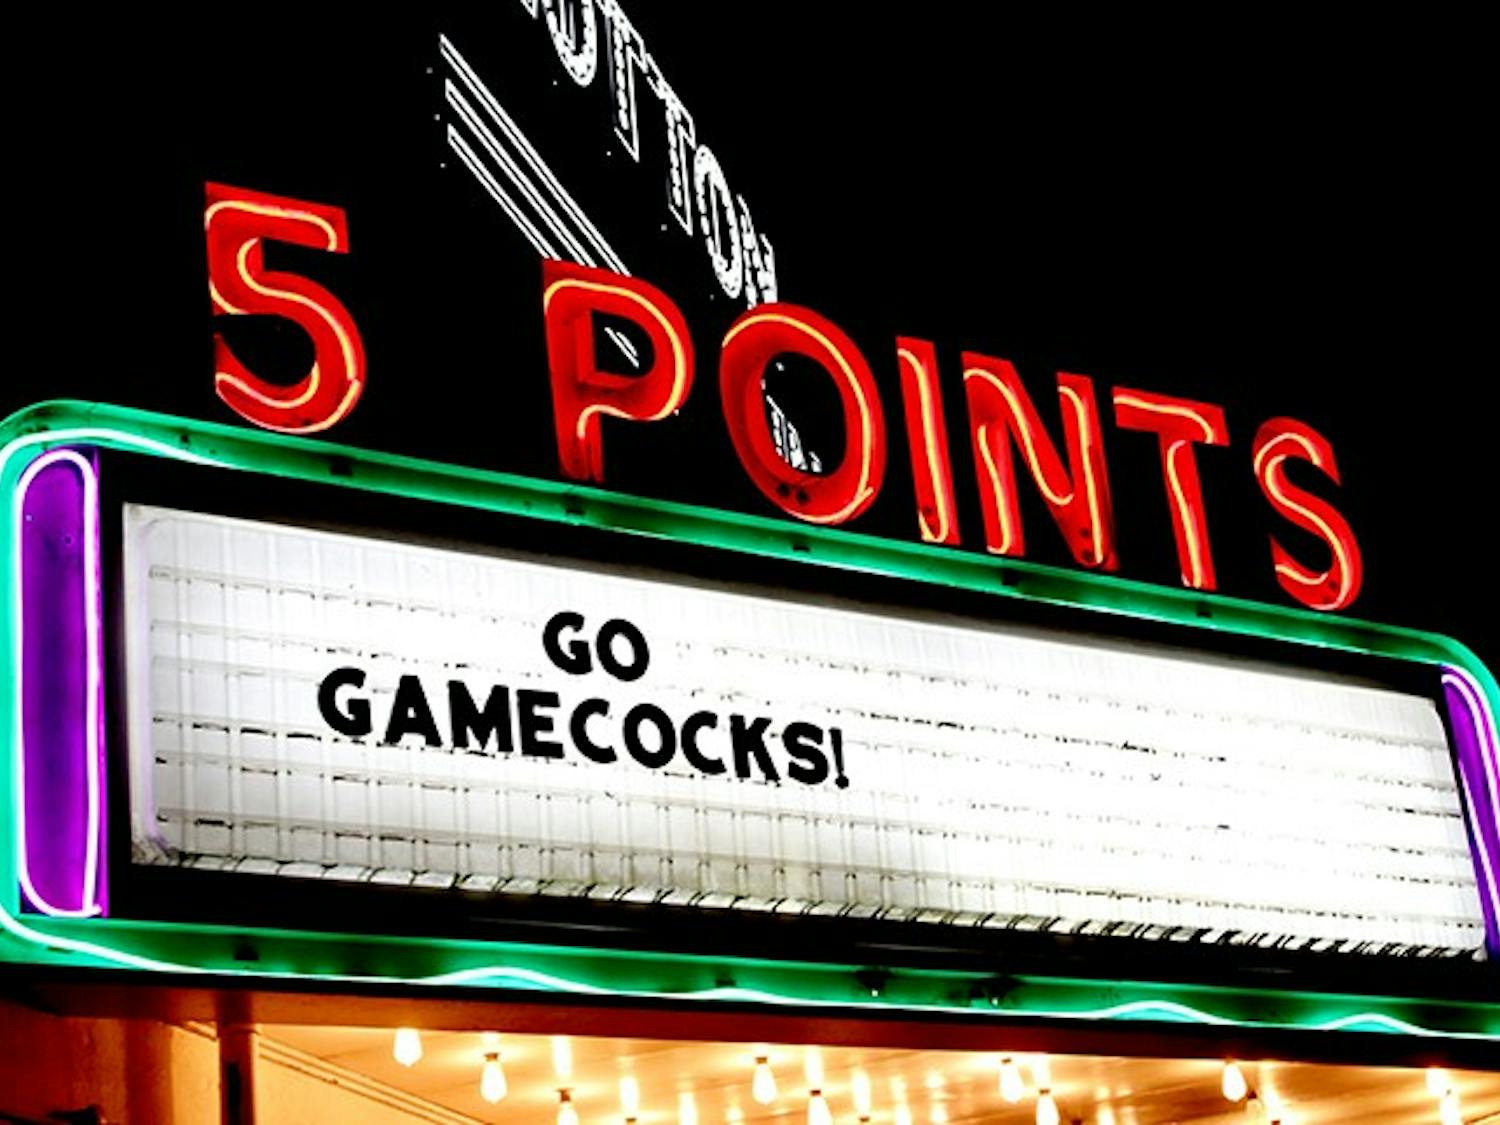 Five Points is a popular nightlife area for local USC students. 